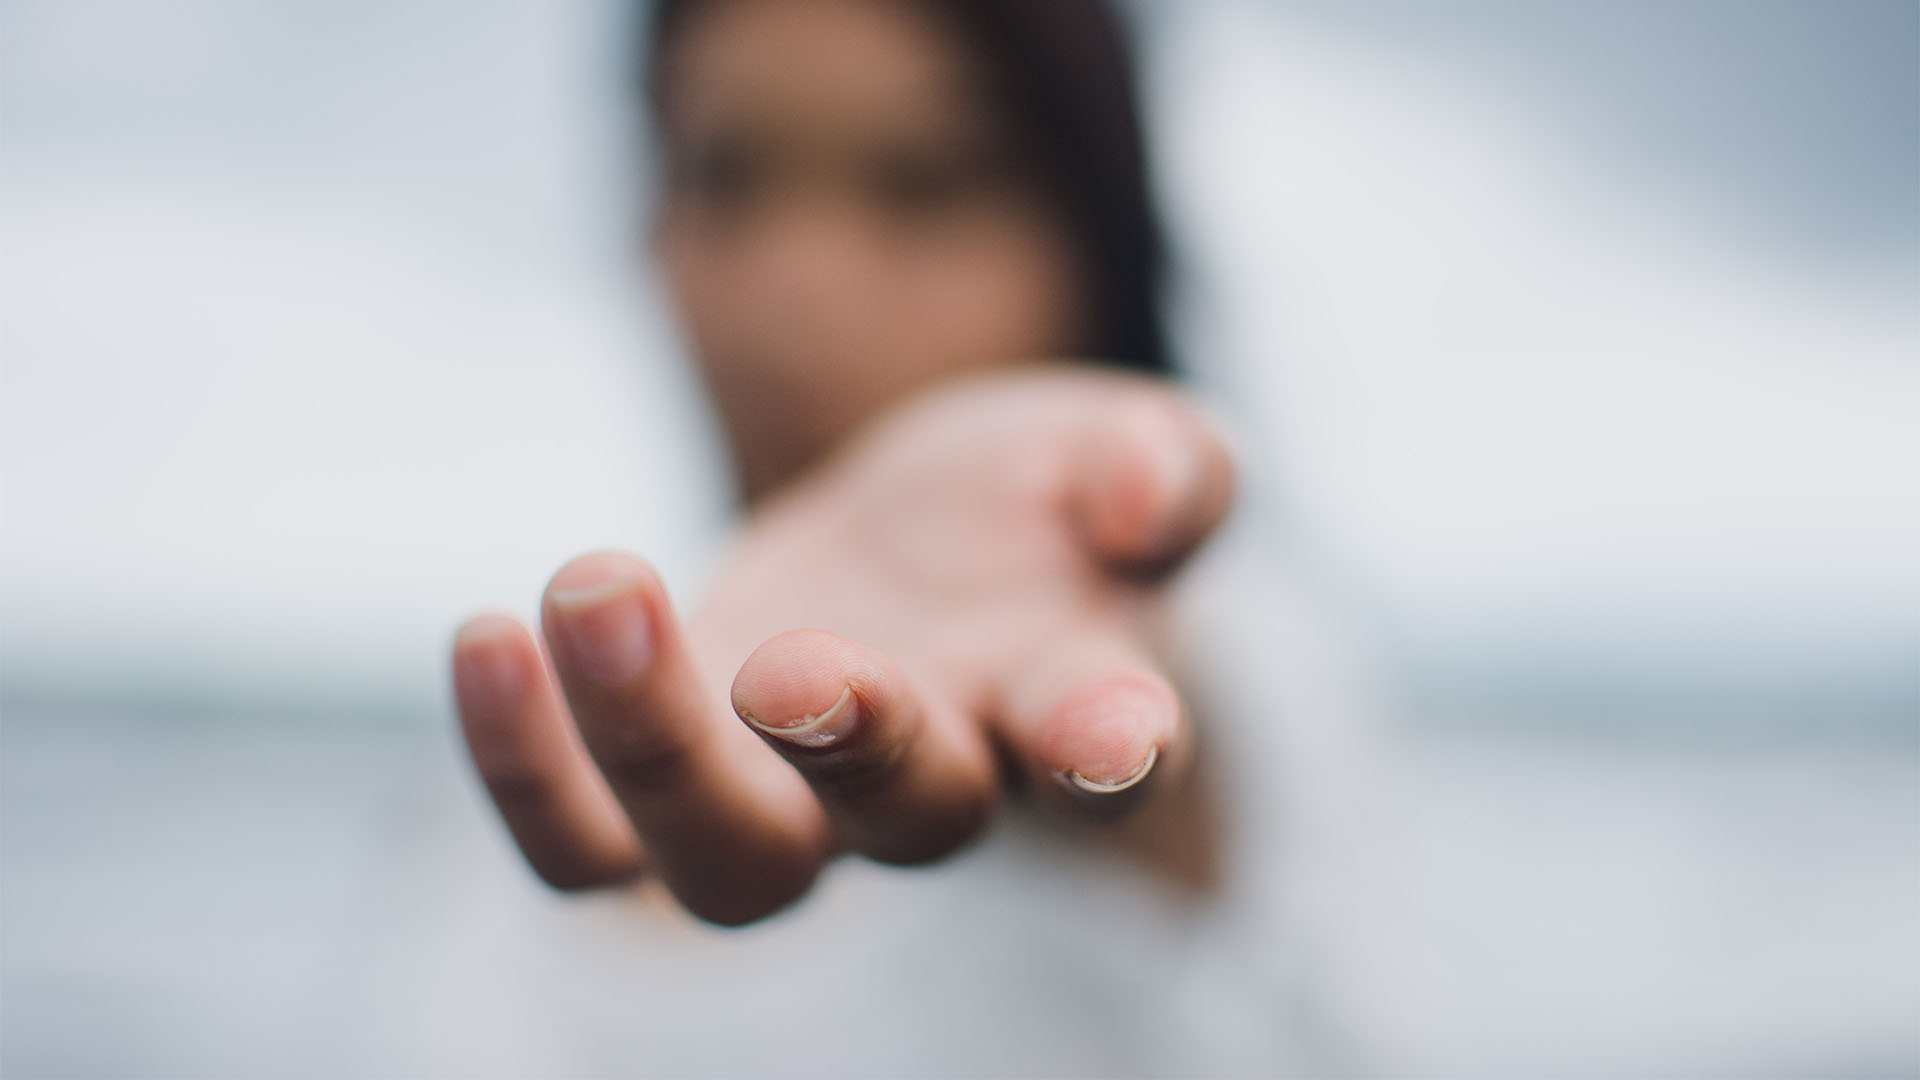 A woman's hand reaching out with her blurry face in the background.